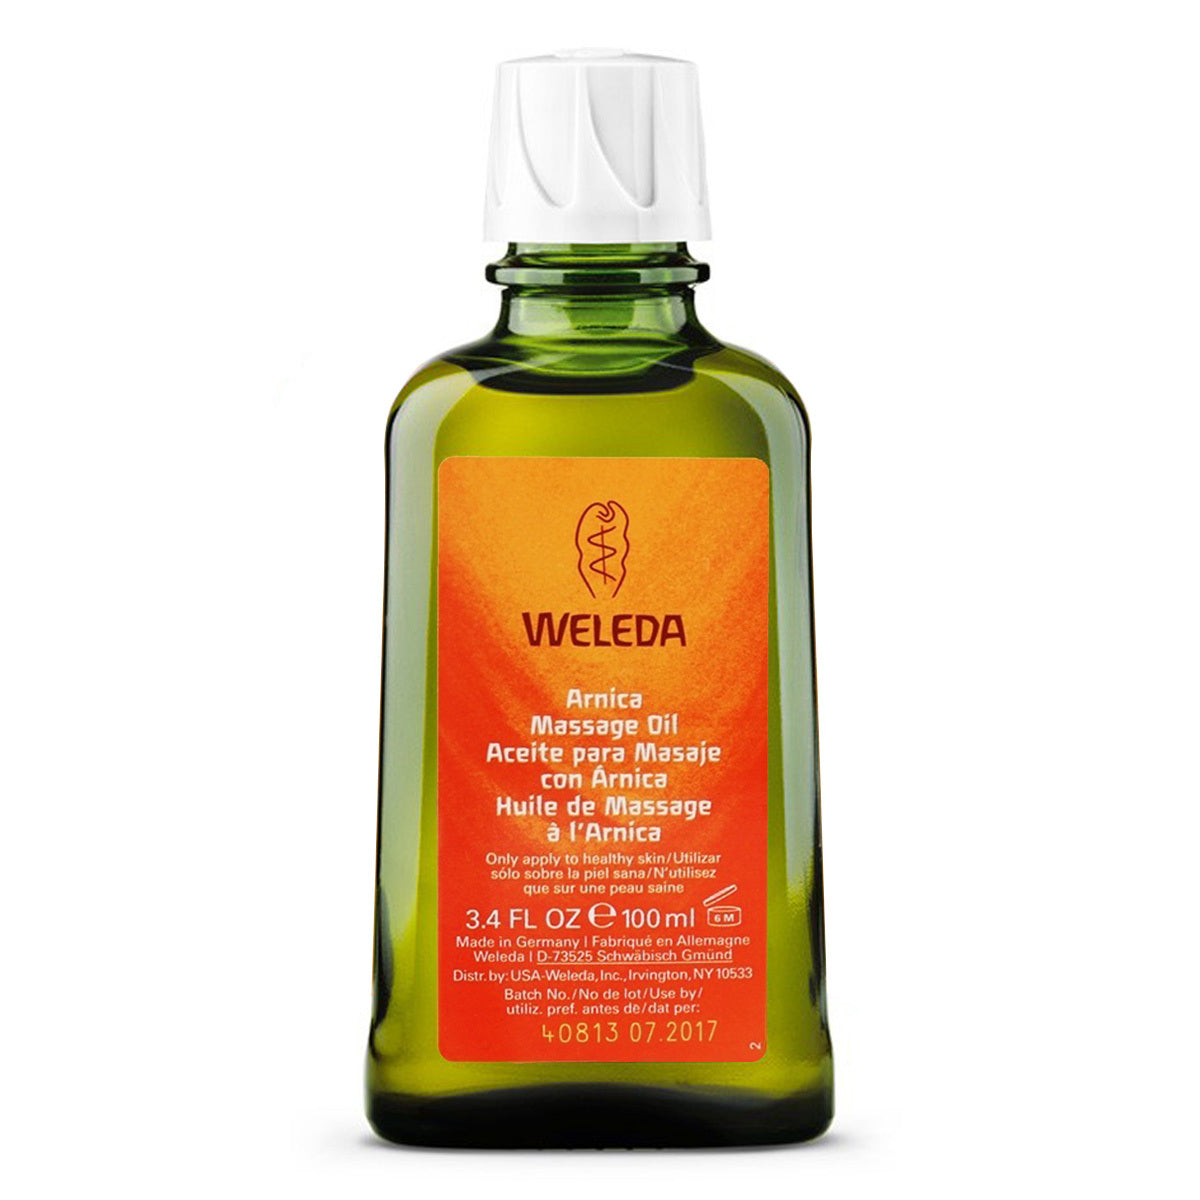 Primary image of Arnica Massage Oil